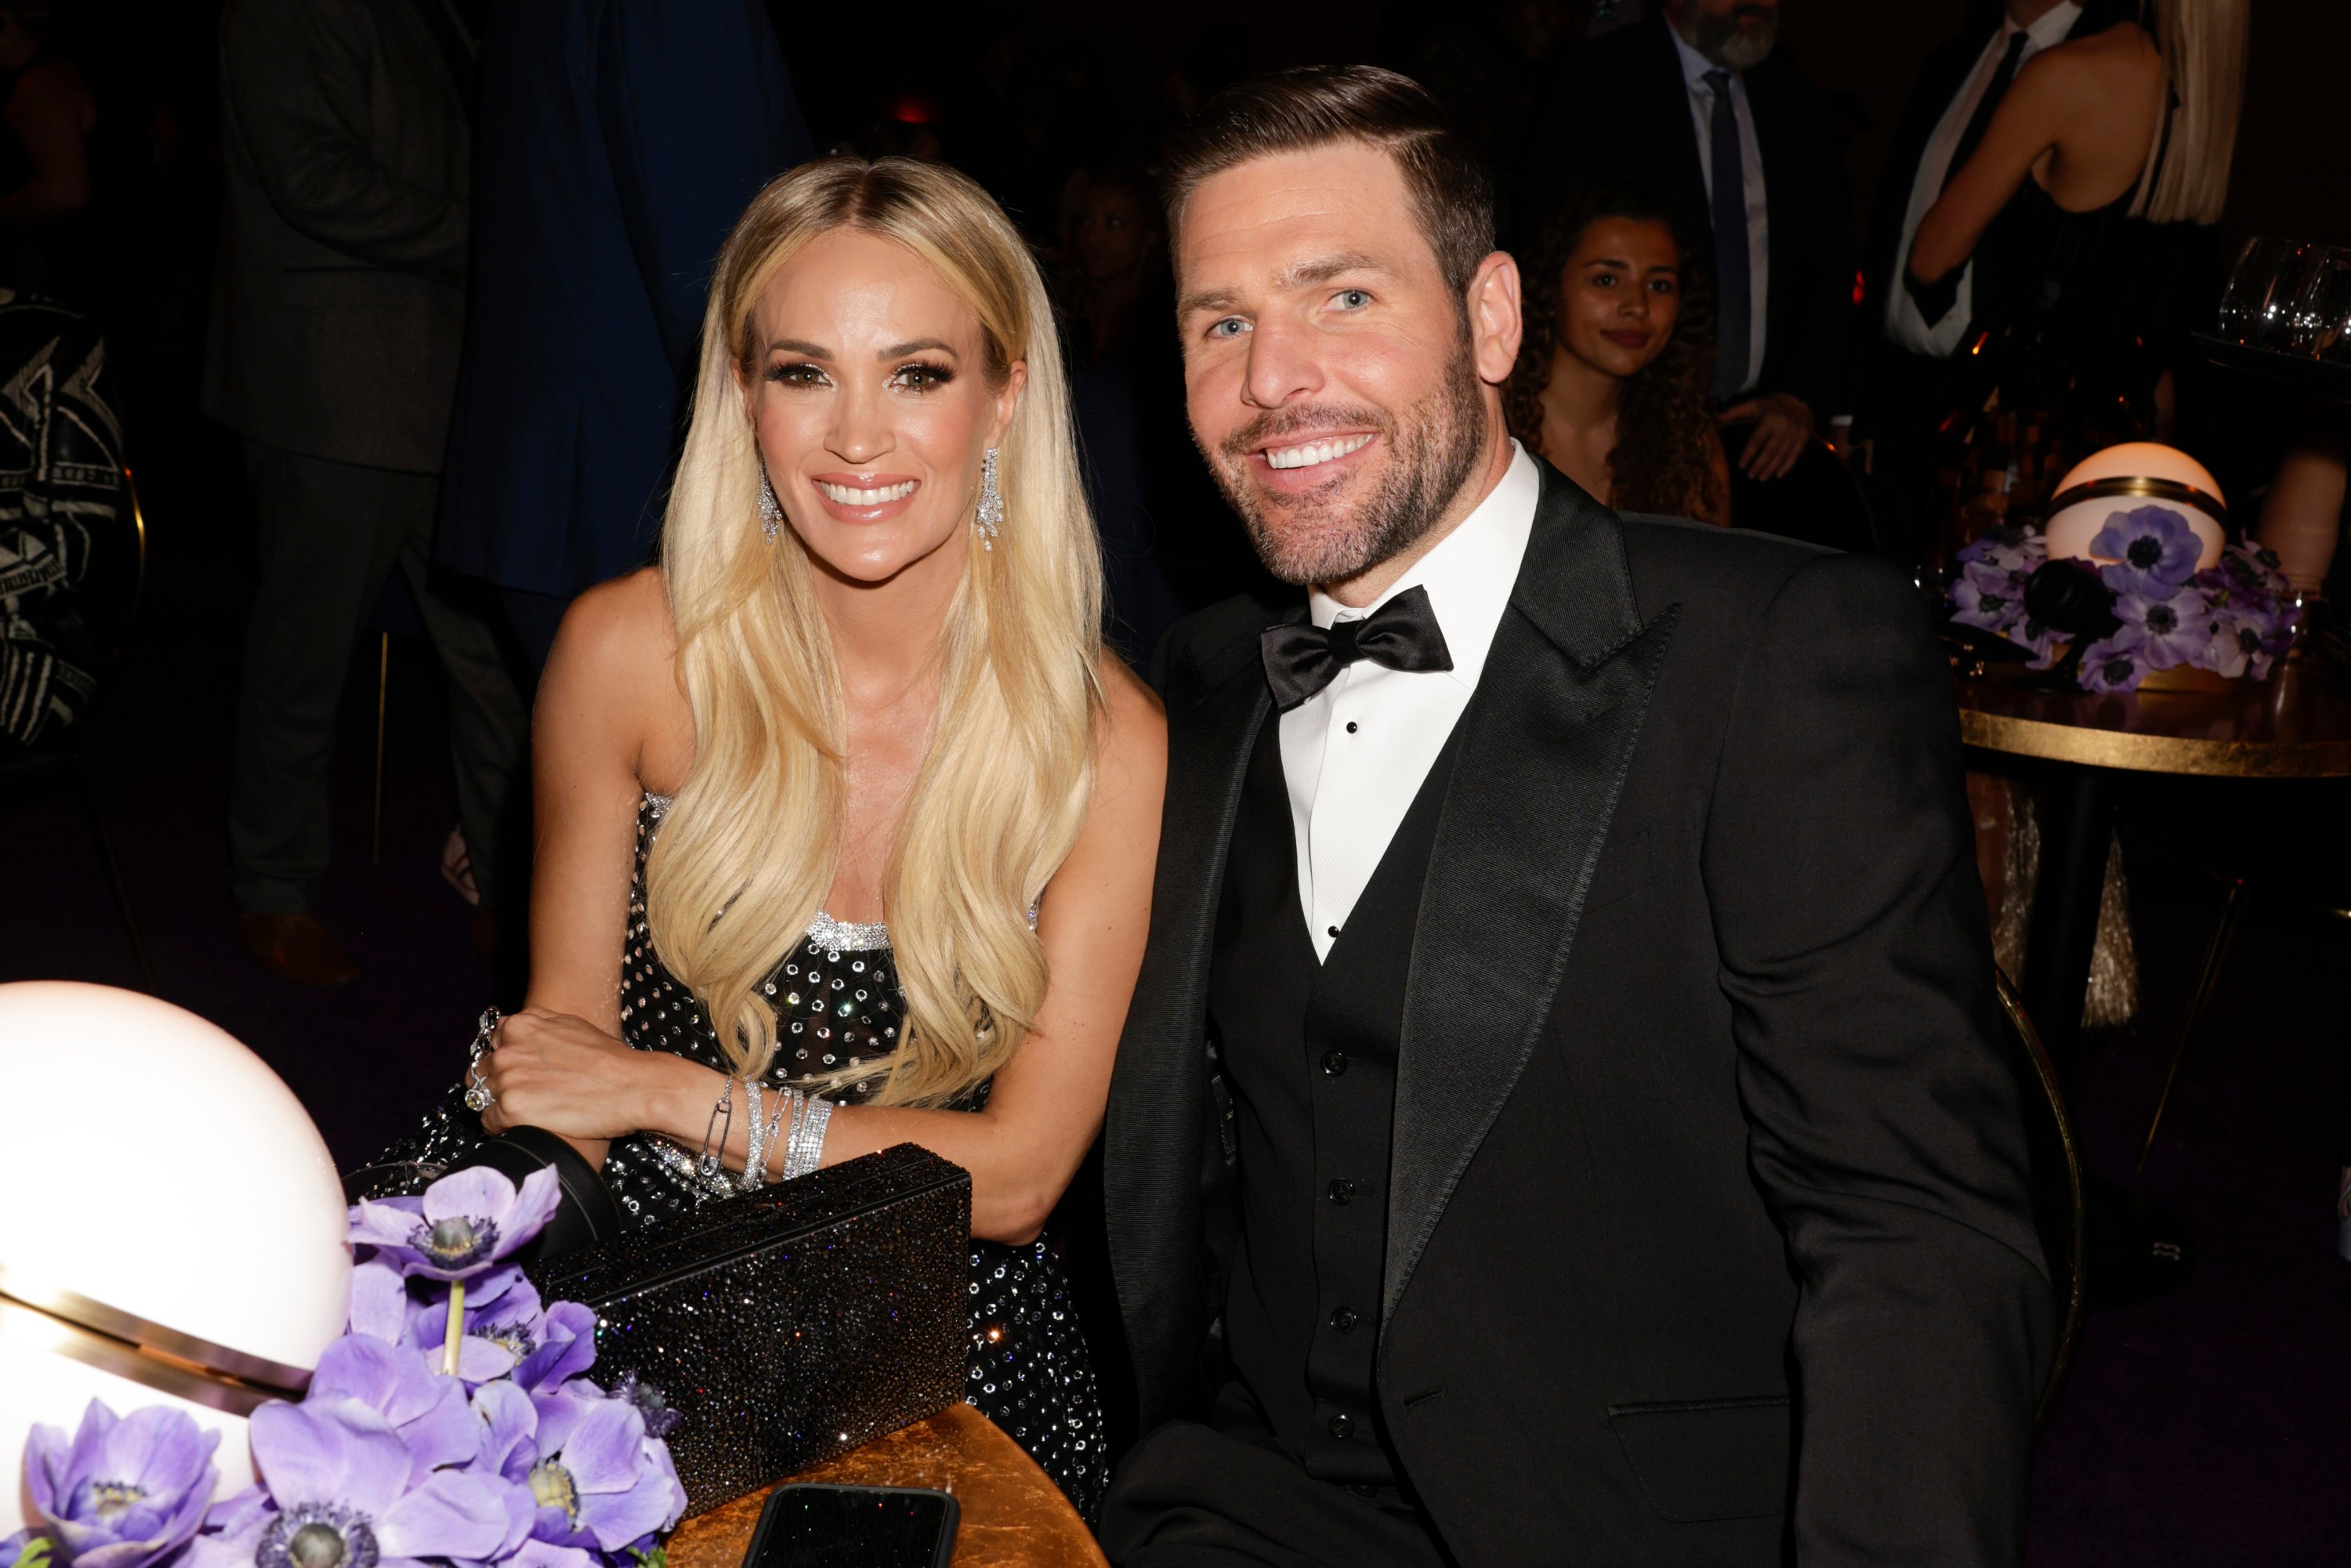 Carrie Underwood's Husband Mike Fisher Always Wanted 'to Have a